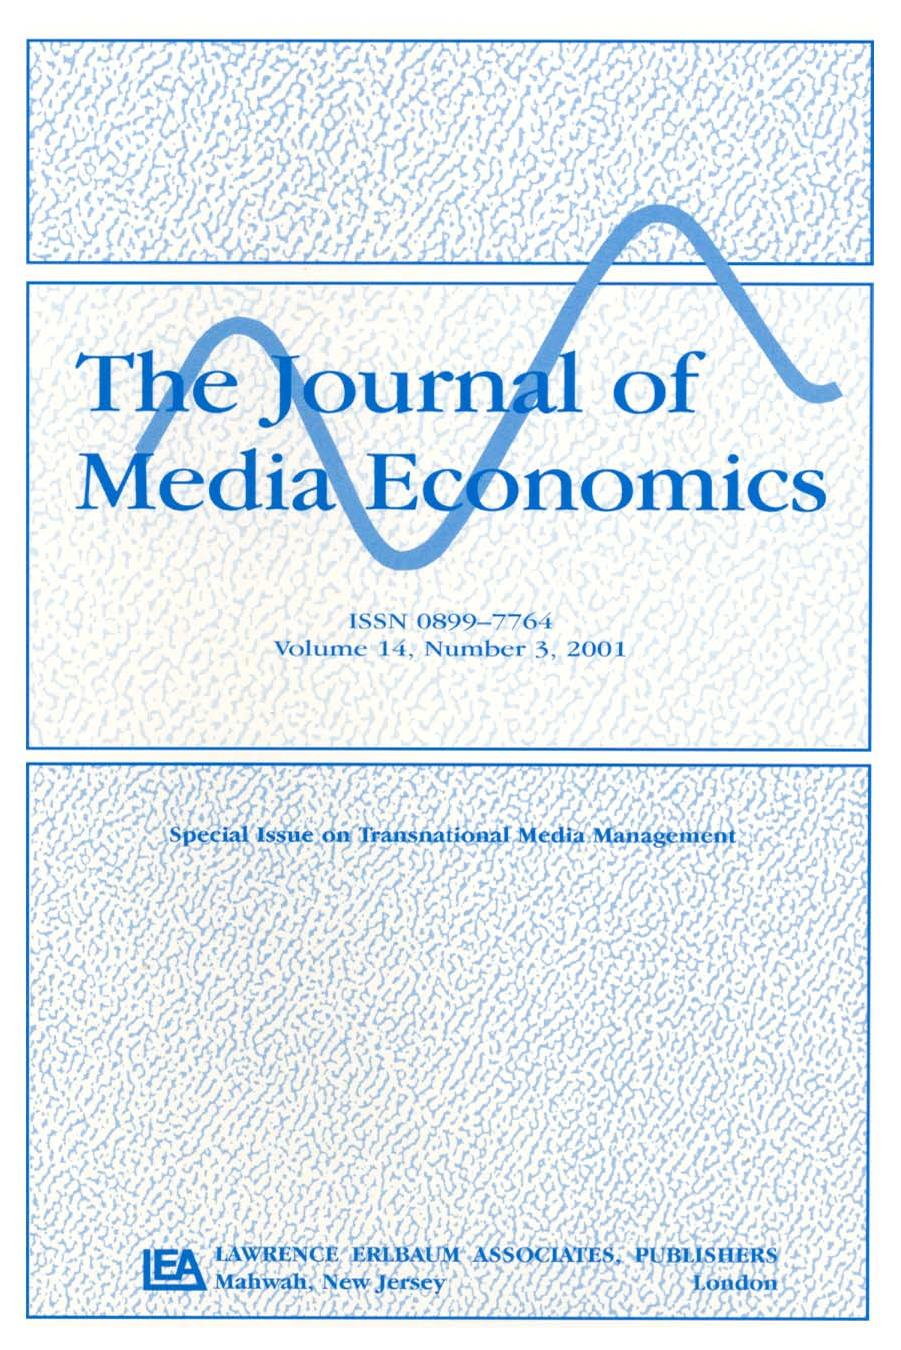 Transnational Media Management: A Special Issue of the Journal of Media Economics